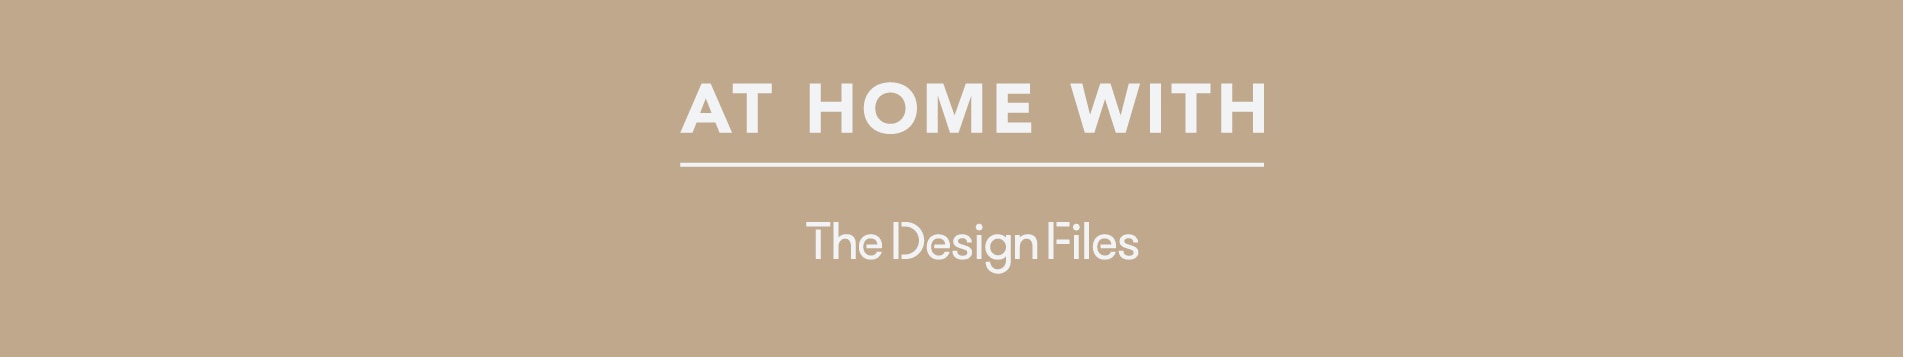 at home with the design files banner brown white